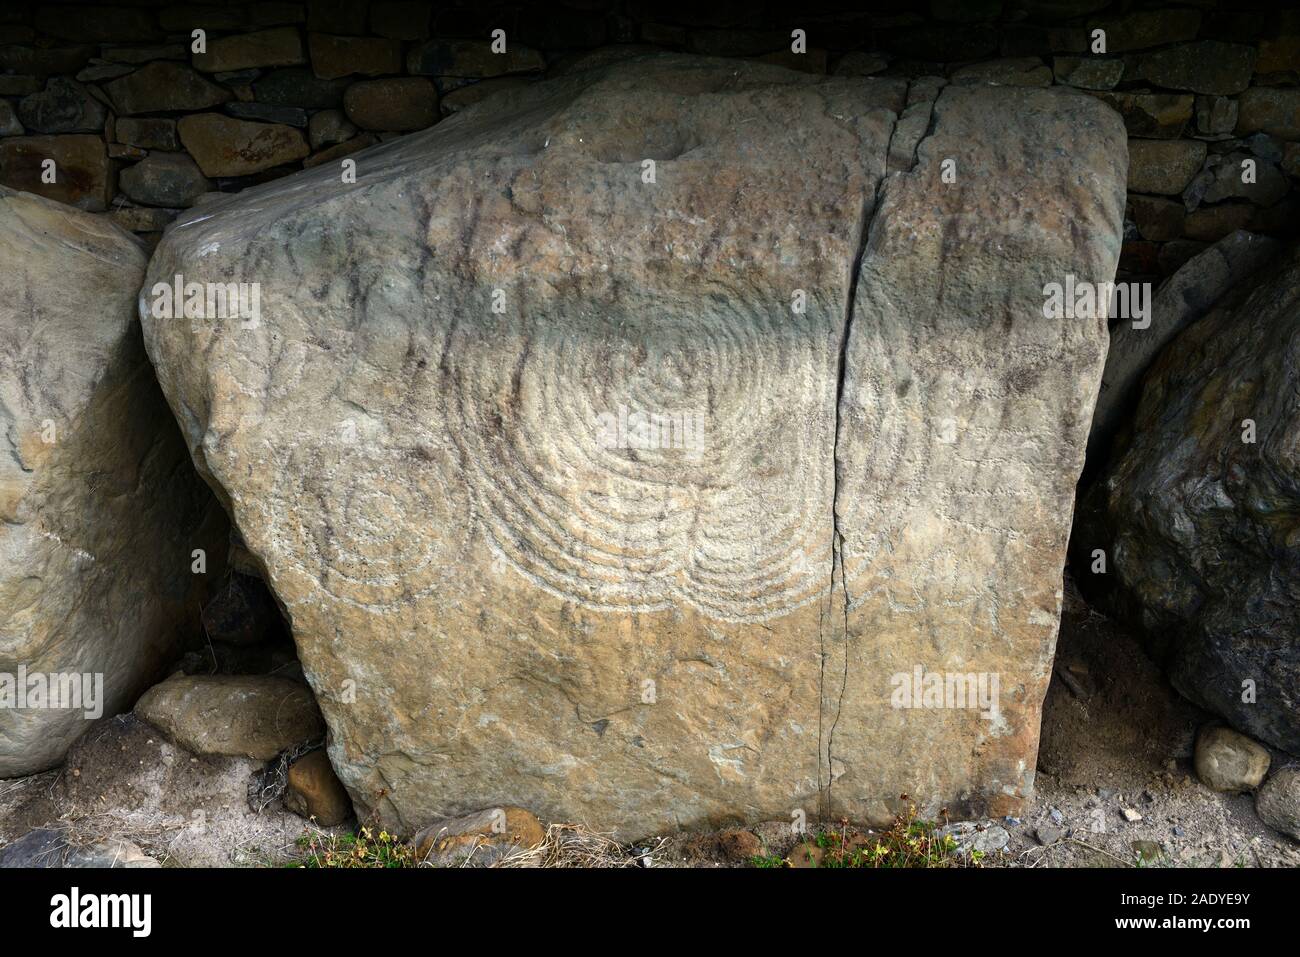 Kerbstone carvings,spiral,arc,arcs,mysterious,unlnown meaning, Knowth neolithic passage tomb, boyne valley,county meath, ireland, world heritage site, Stock Photo